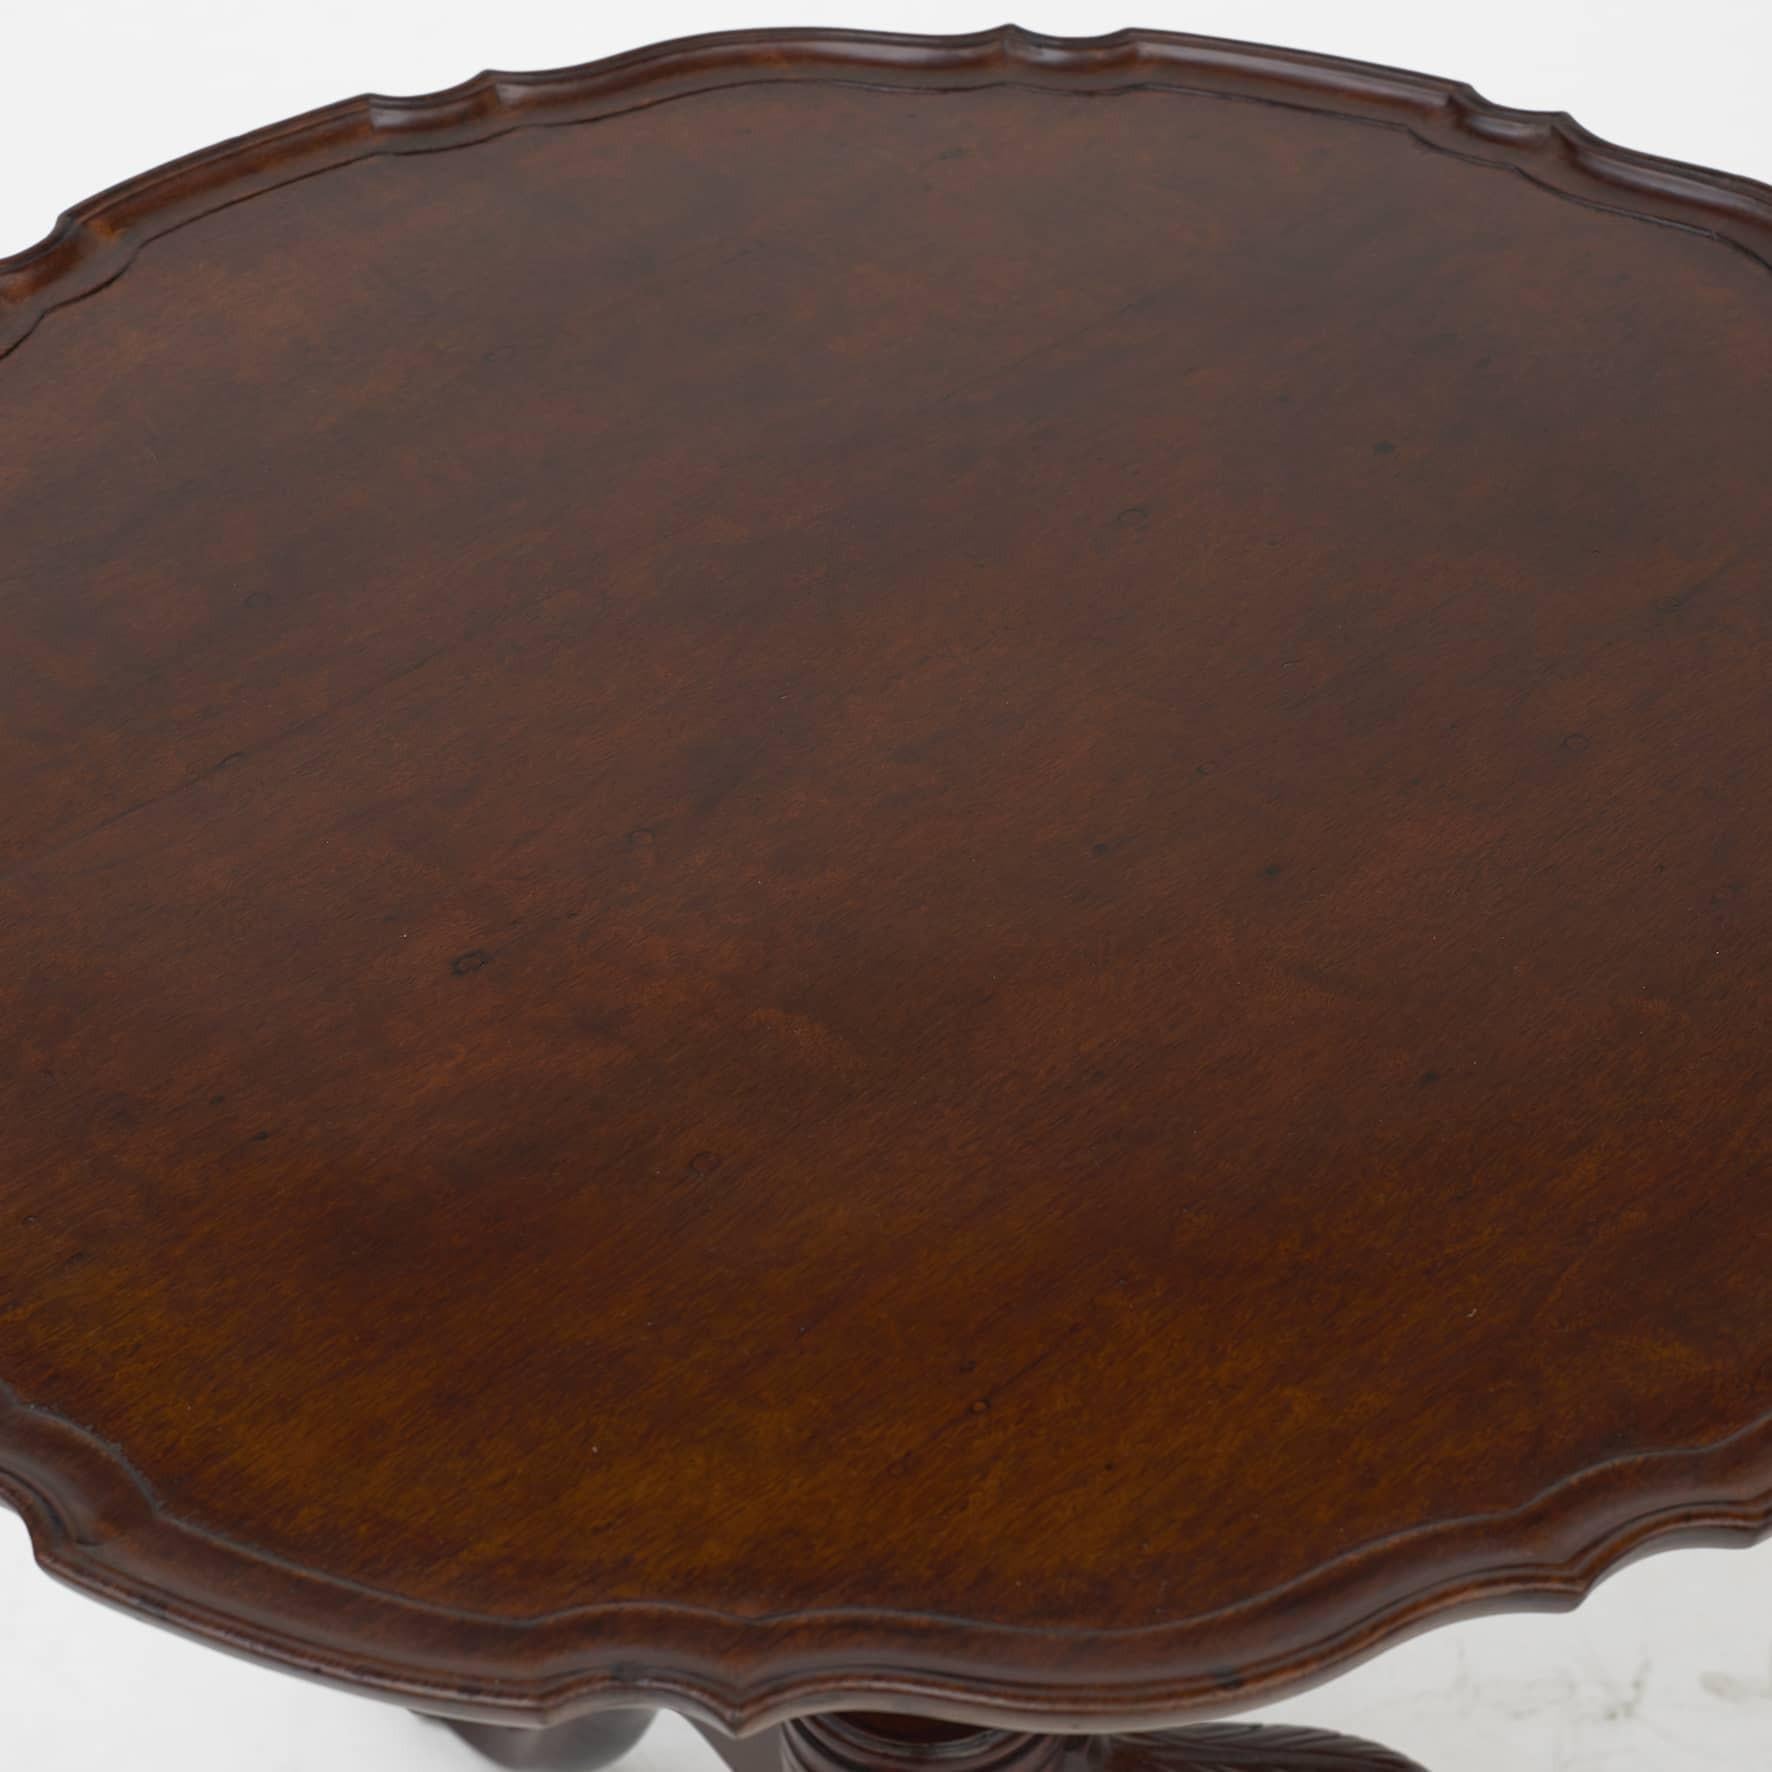 English Chippendale Tilt-top table i mahogany with tripod base.
Circular top with a carved scalloped molded edge.
Supported on a carved three foot pedestal base over a turned stem.

England 1750-1770.